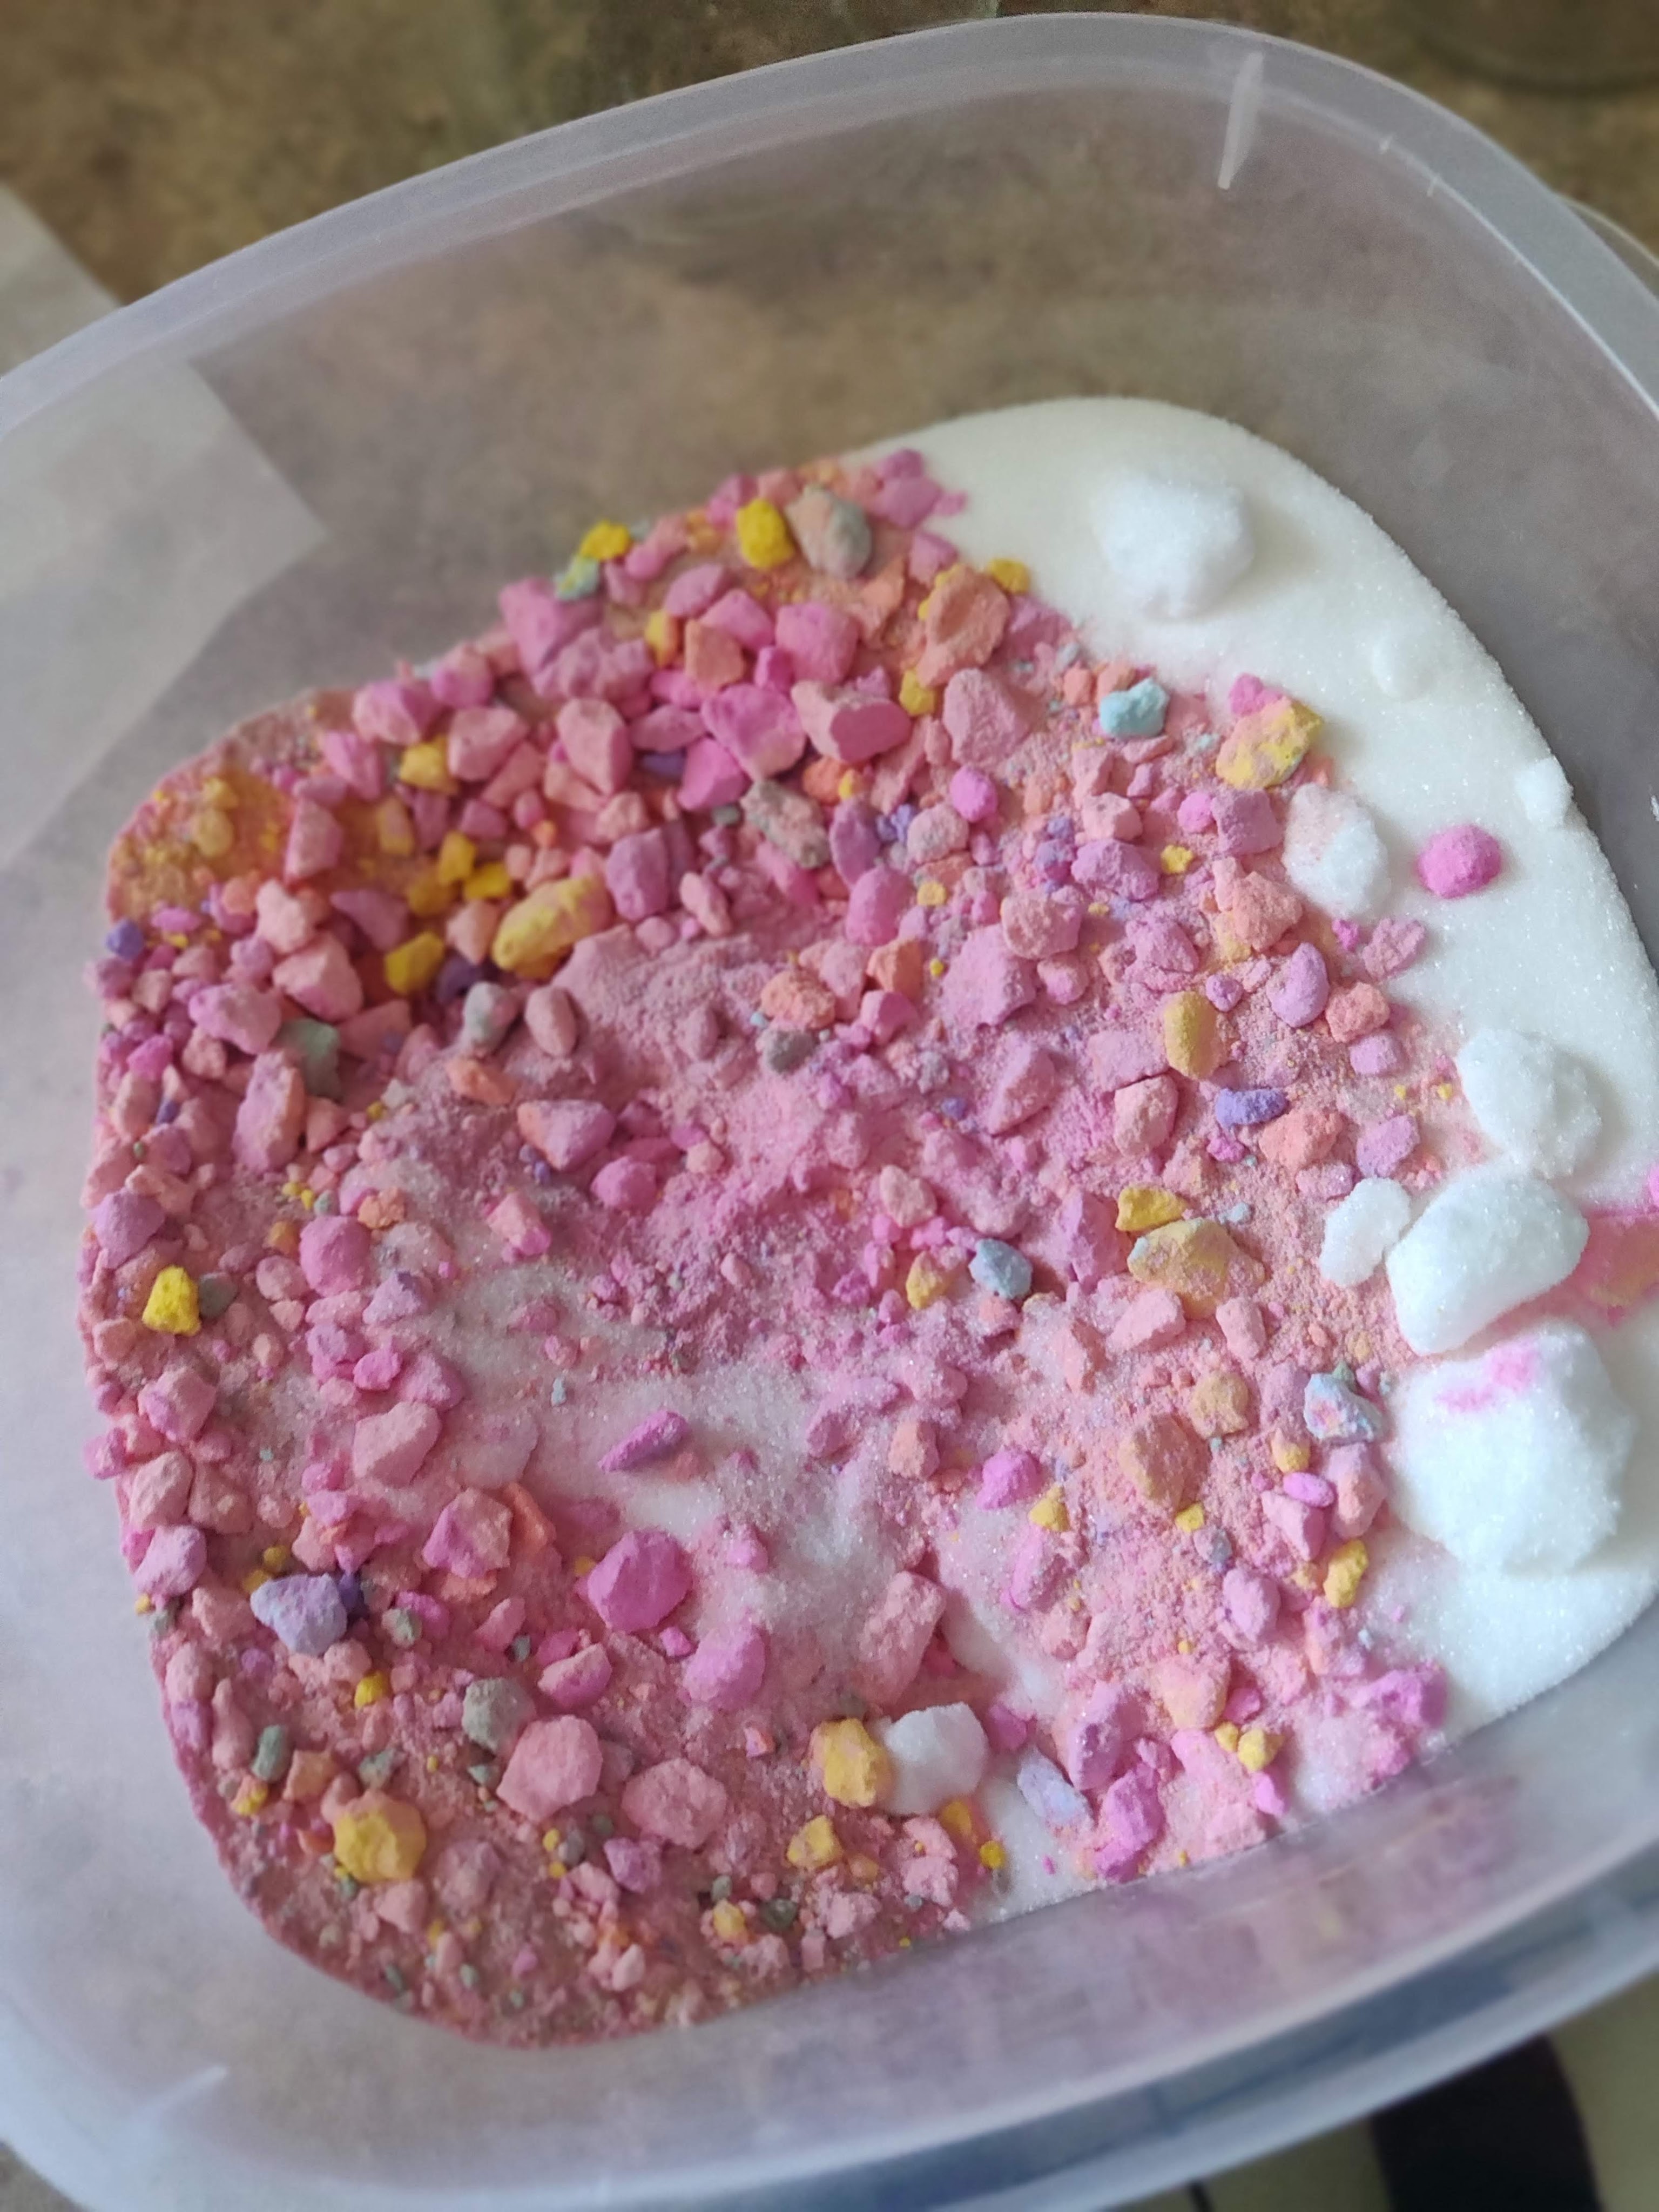 Crumbled bath bomb and sugar combined in a plastic container.